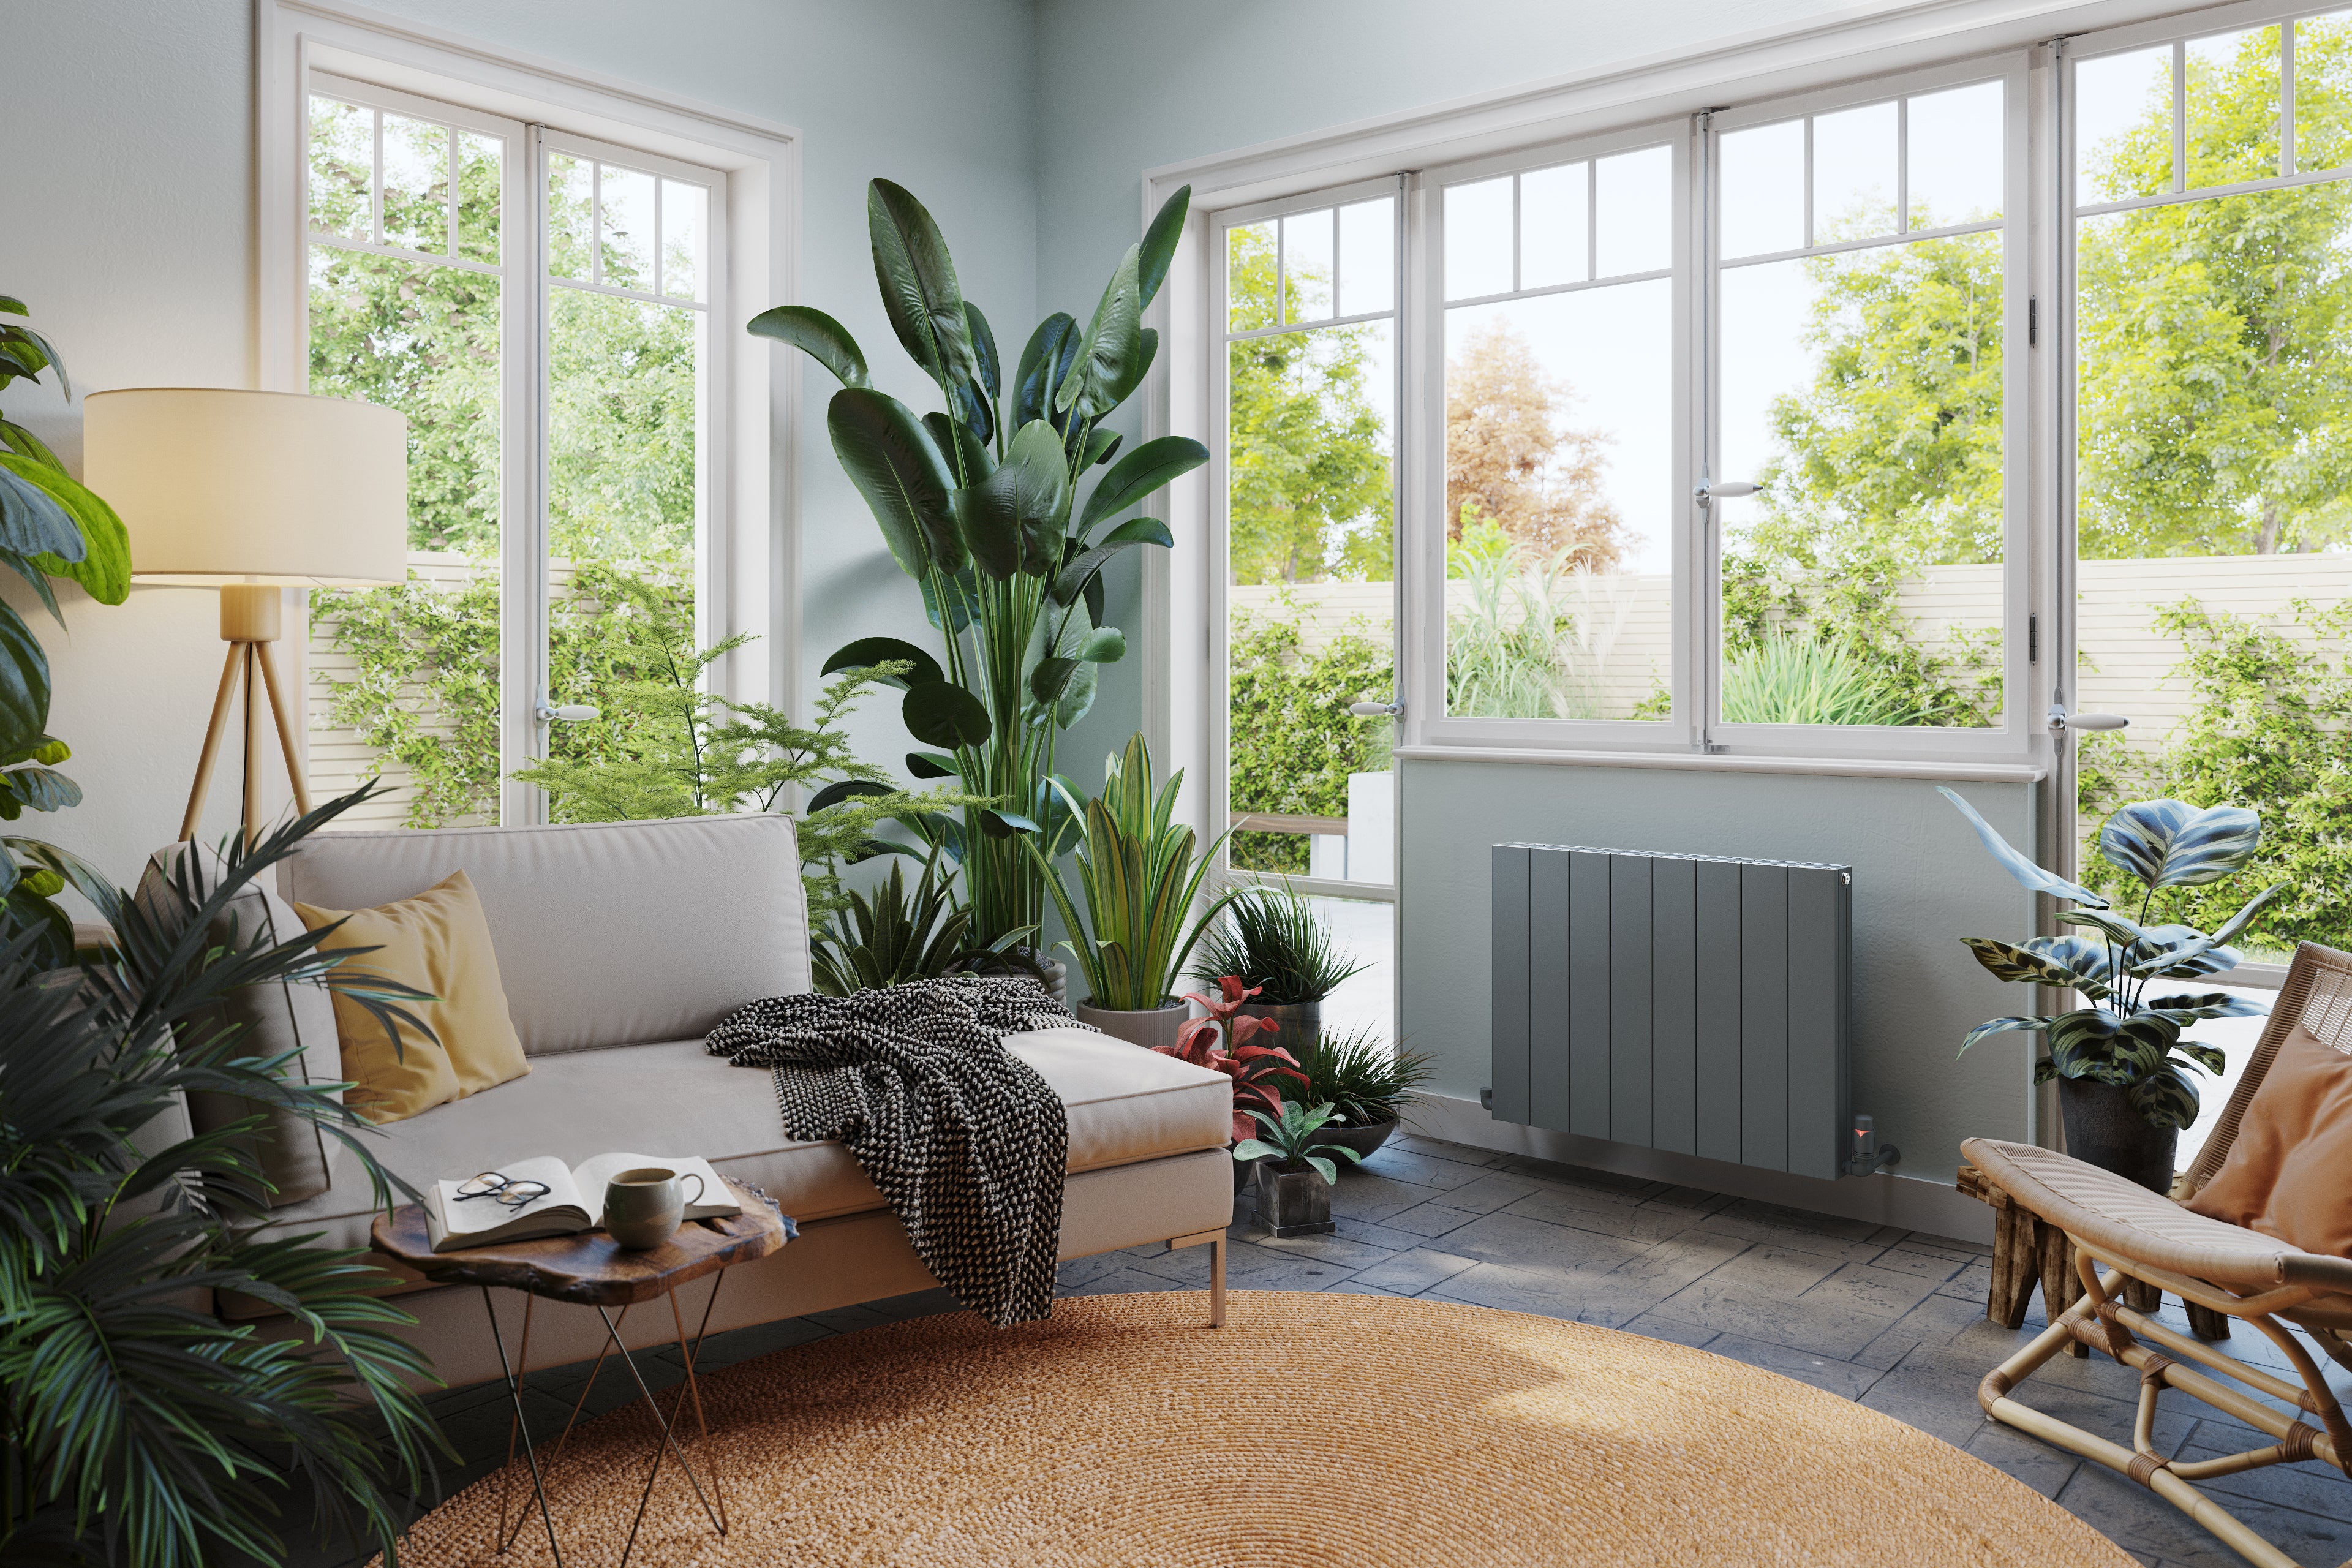 Why Summer Is the Perfect Time to Buy a New Radiator?